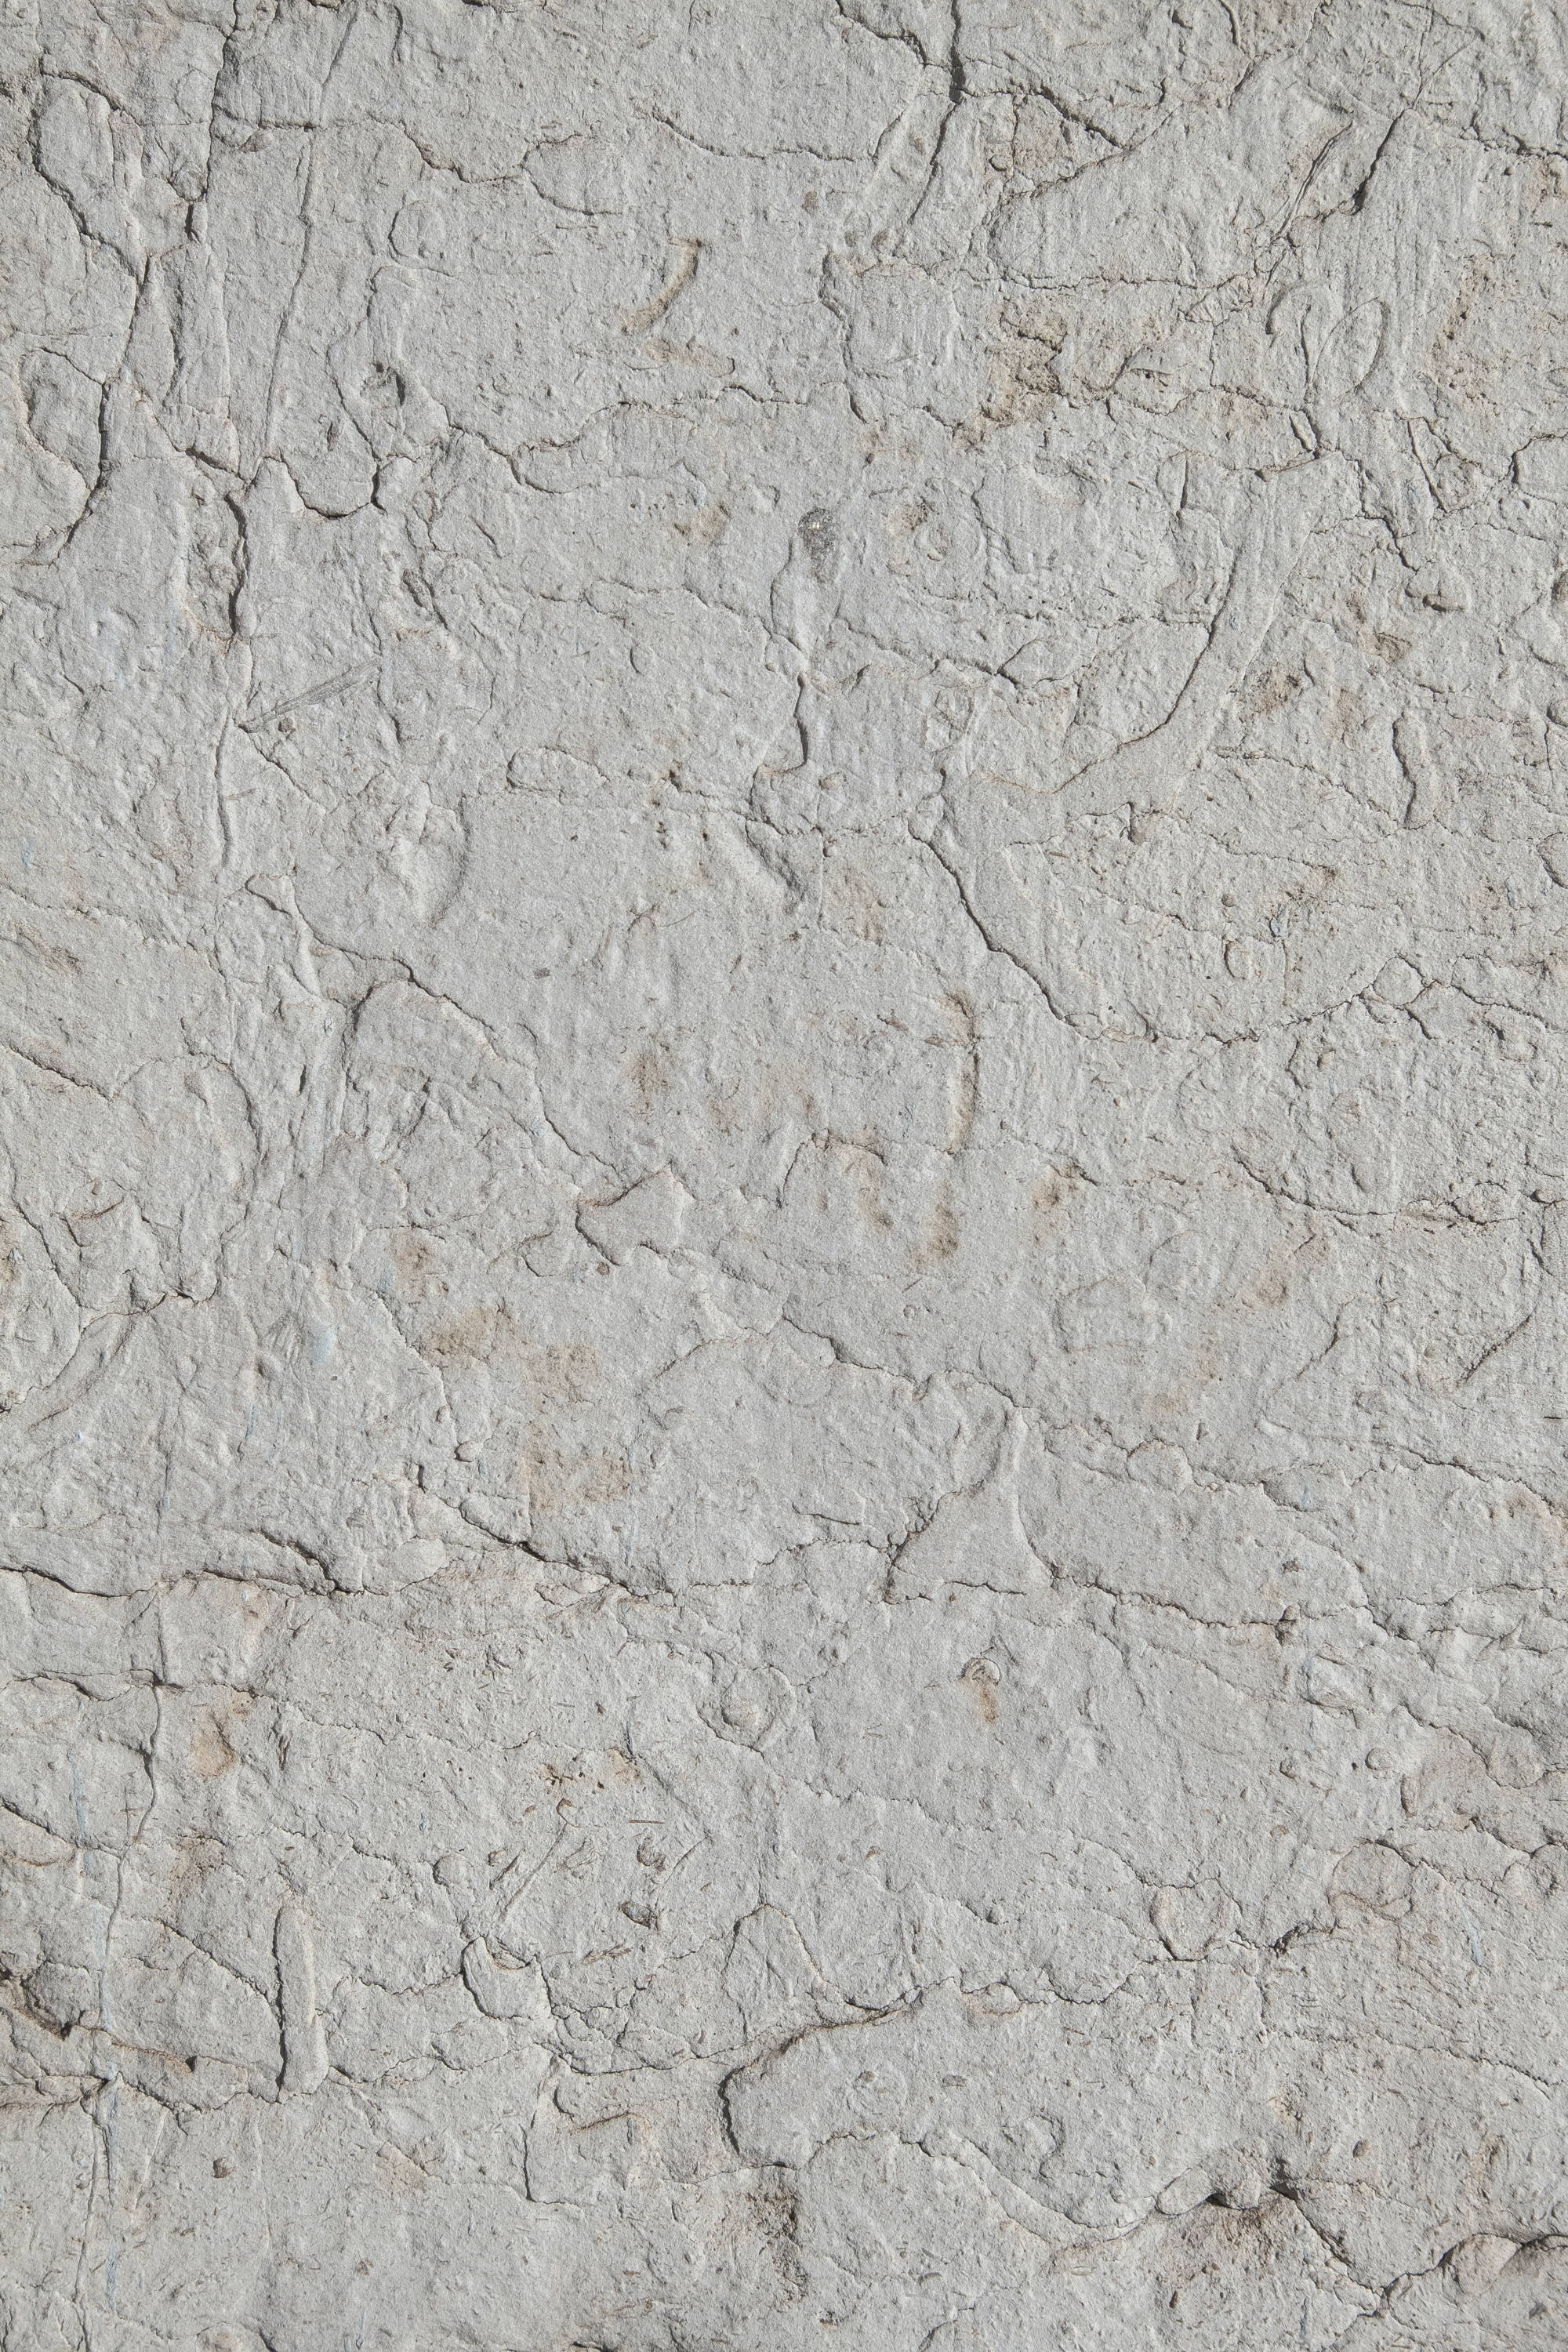 White and brown concrete wall